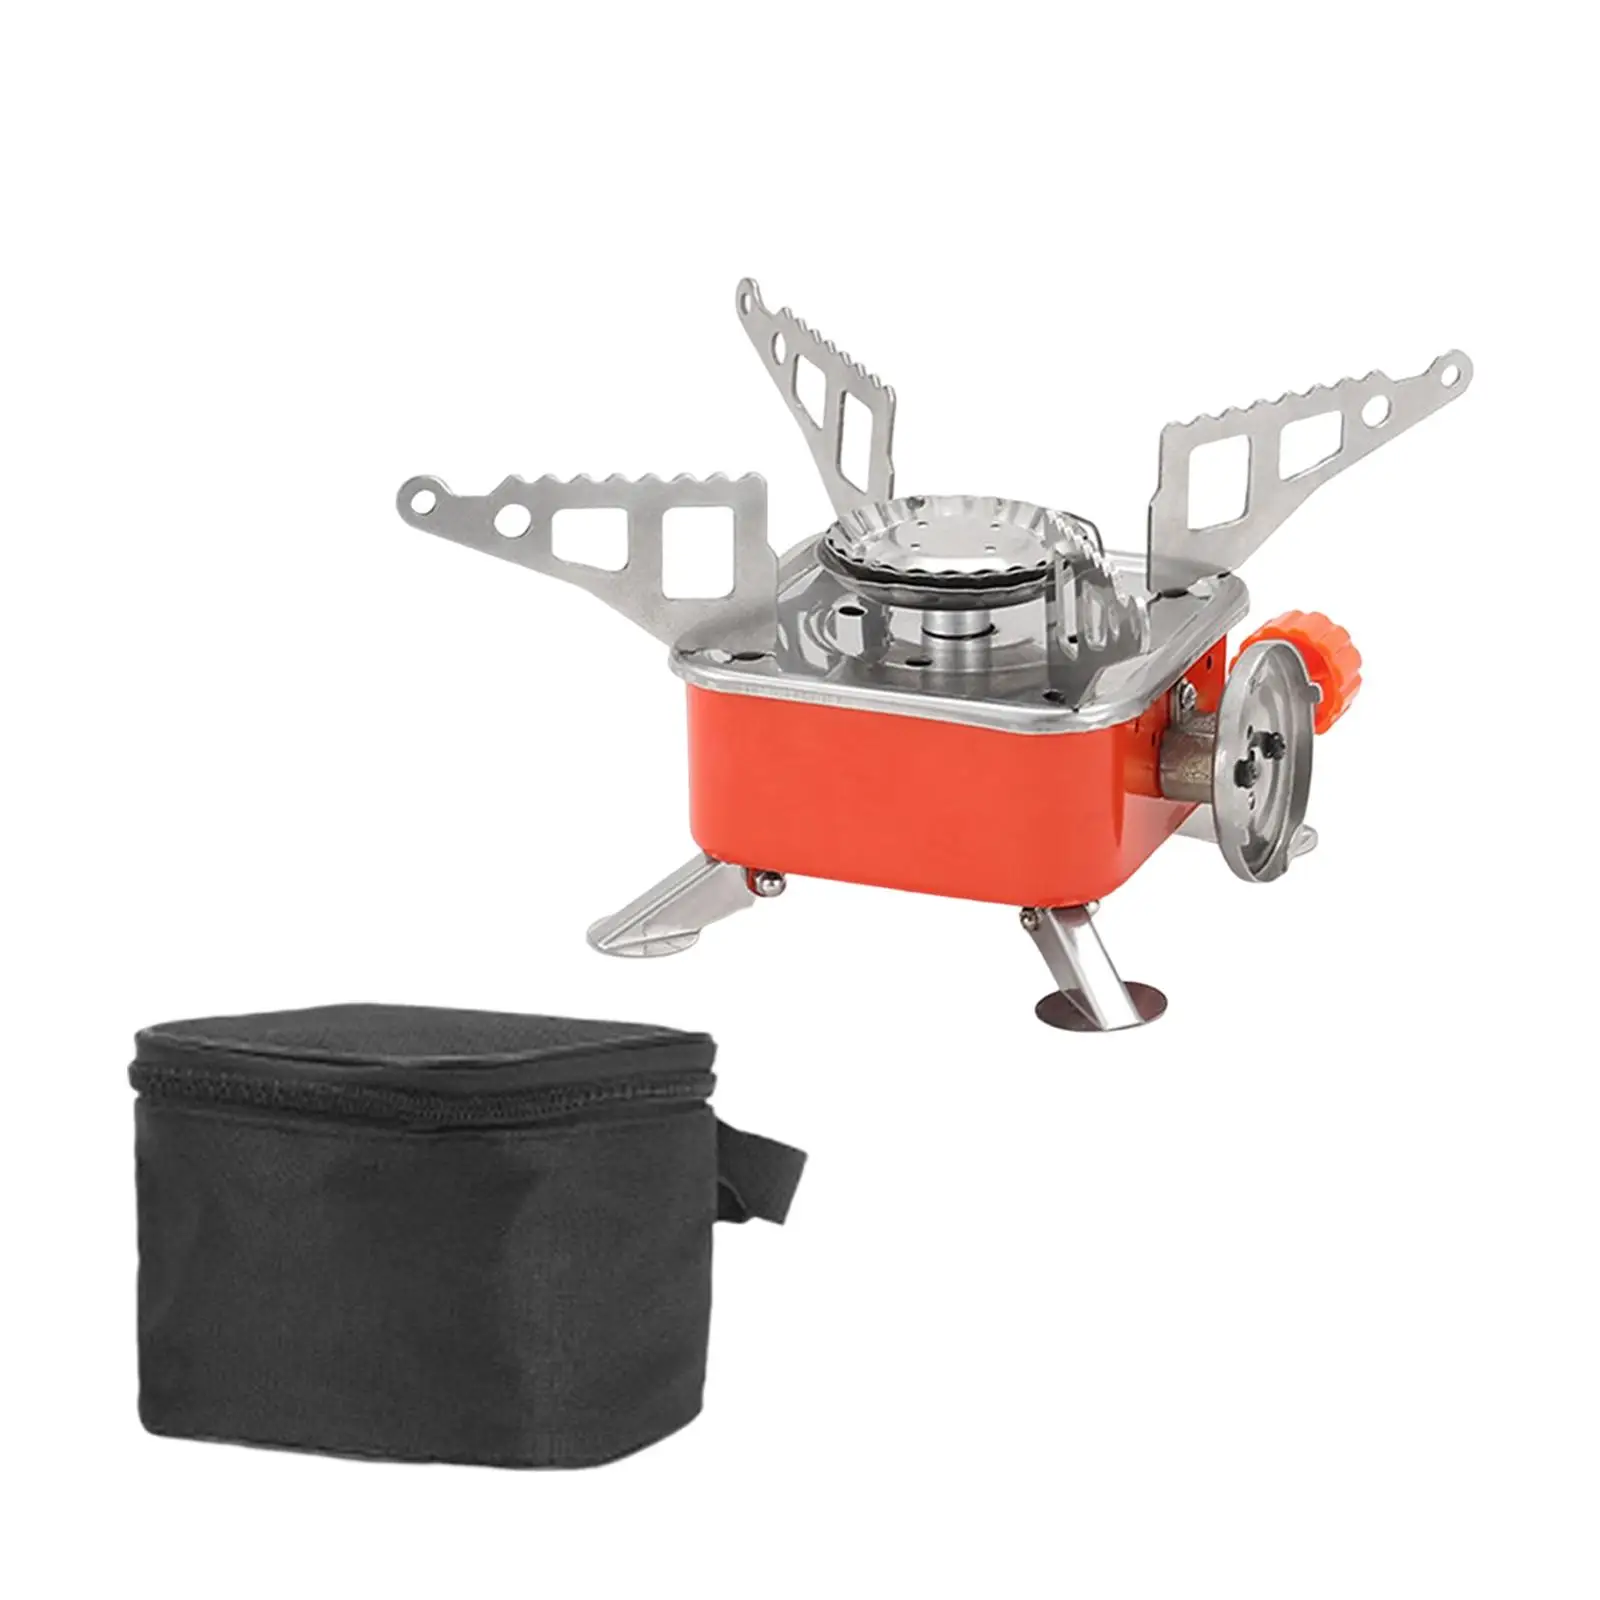 Portable Camping Gas Stove with Piezo Ignition Folding Cooking Mini Stove Burner Cooker Gear for Fishing Hiking Picnic Outdoor